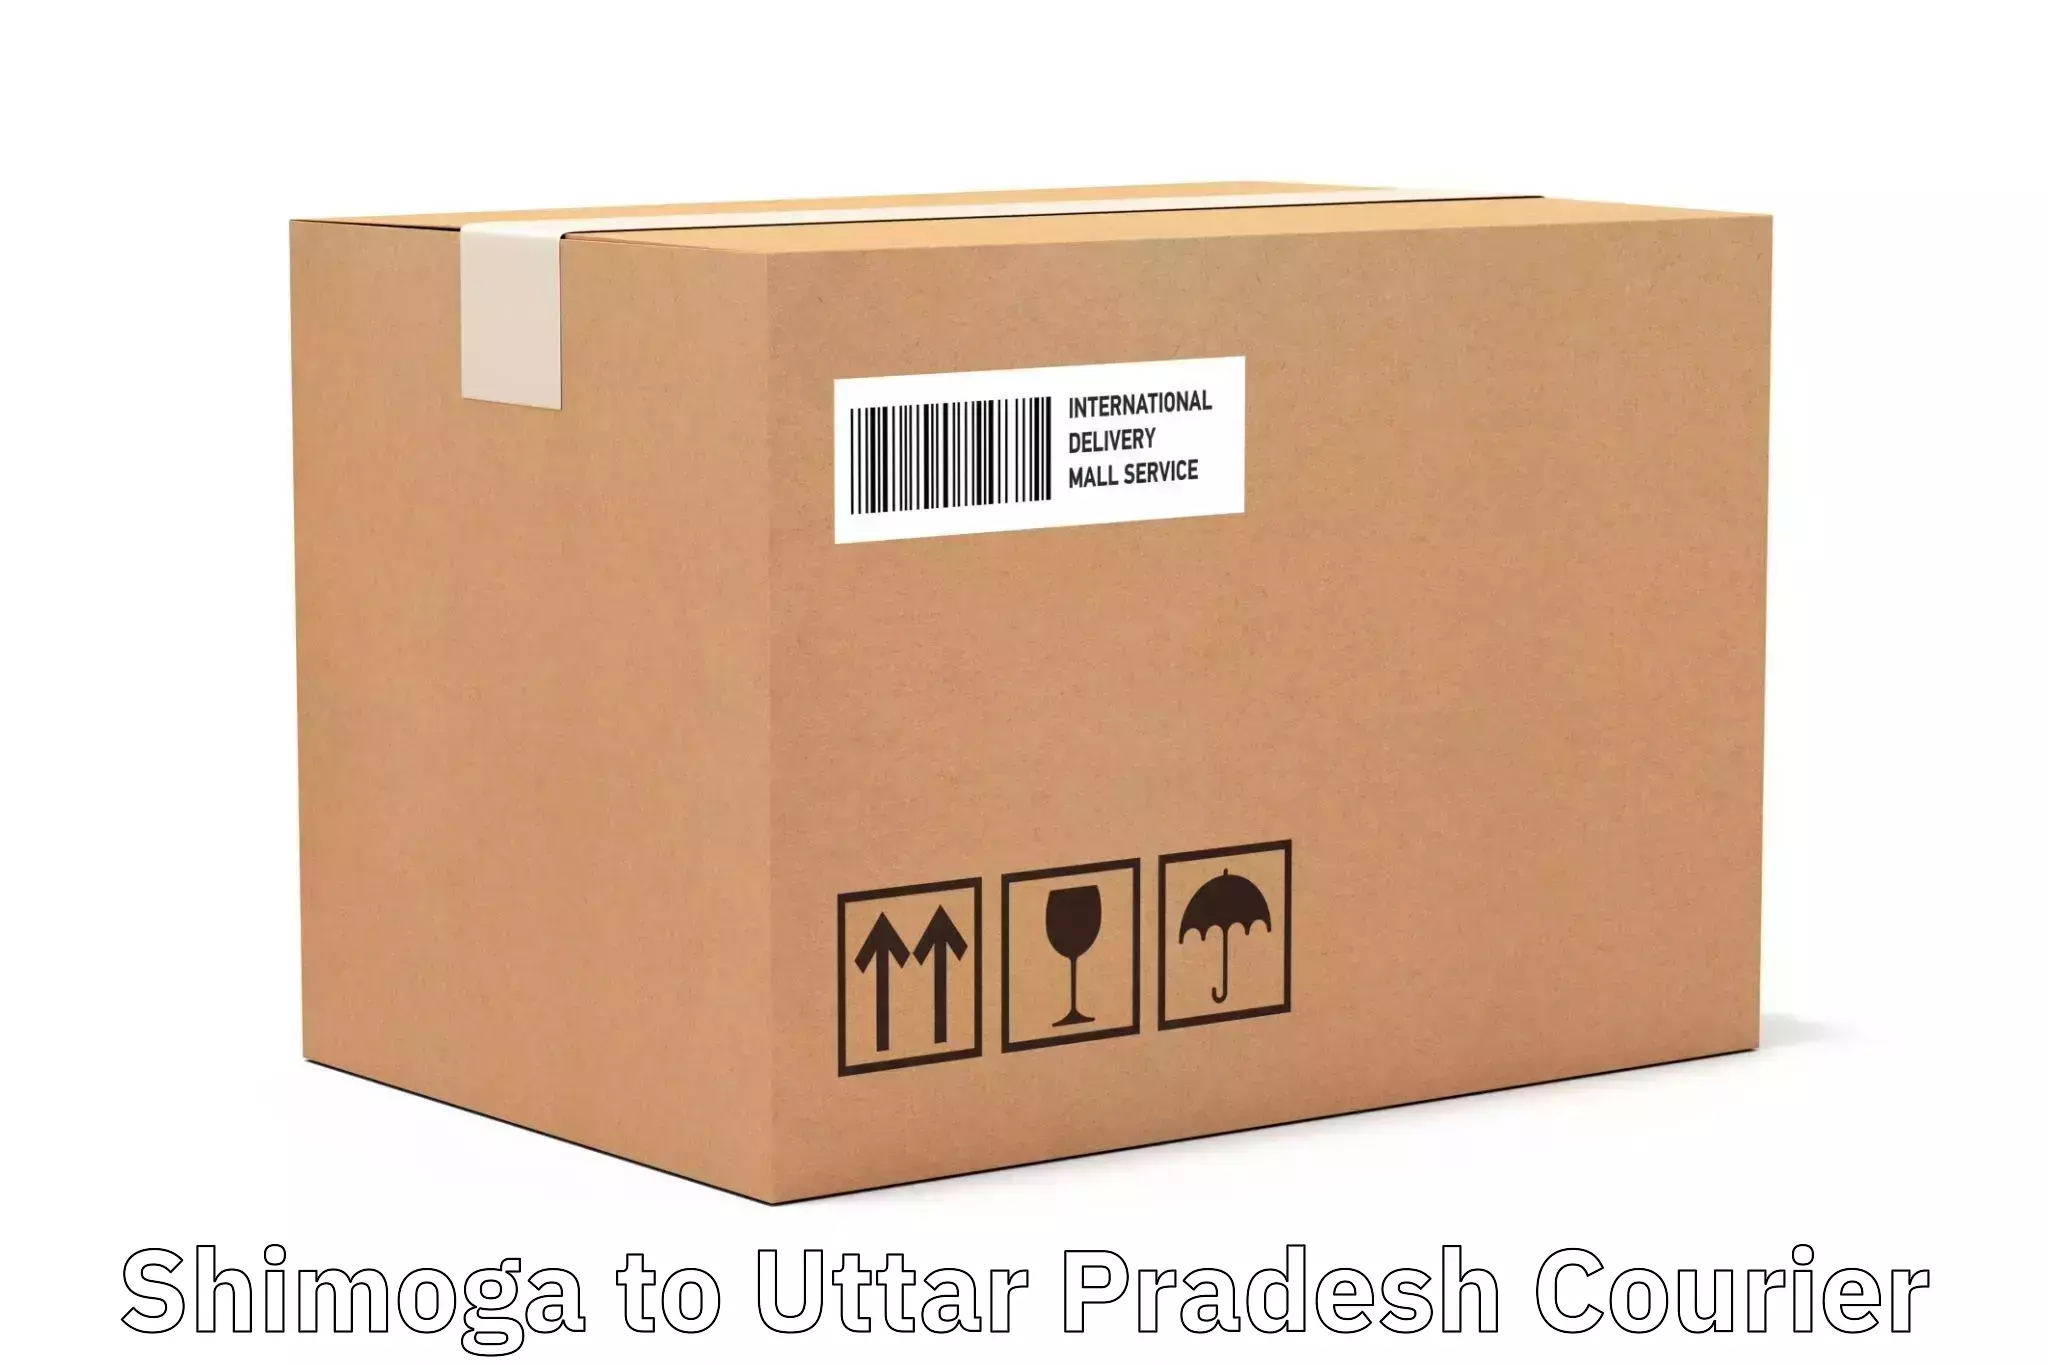 State-of-the-art courier technology in Shimoga to Sikandra Rao